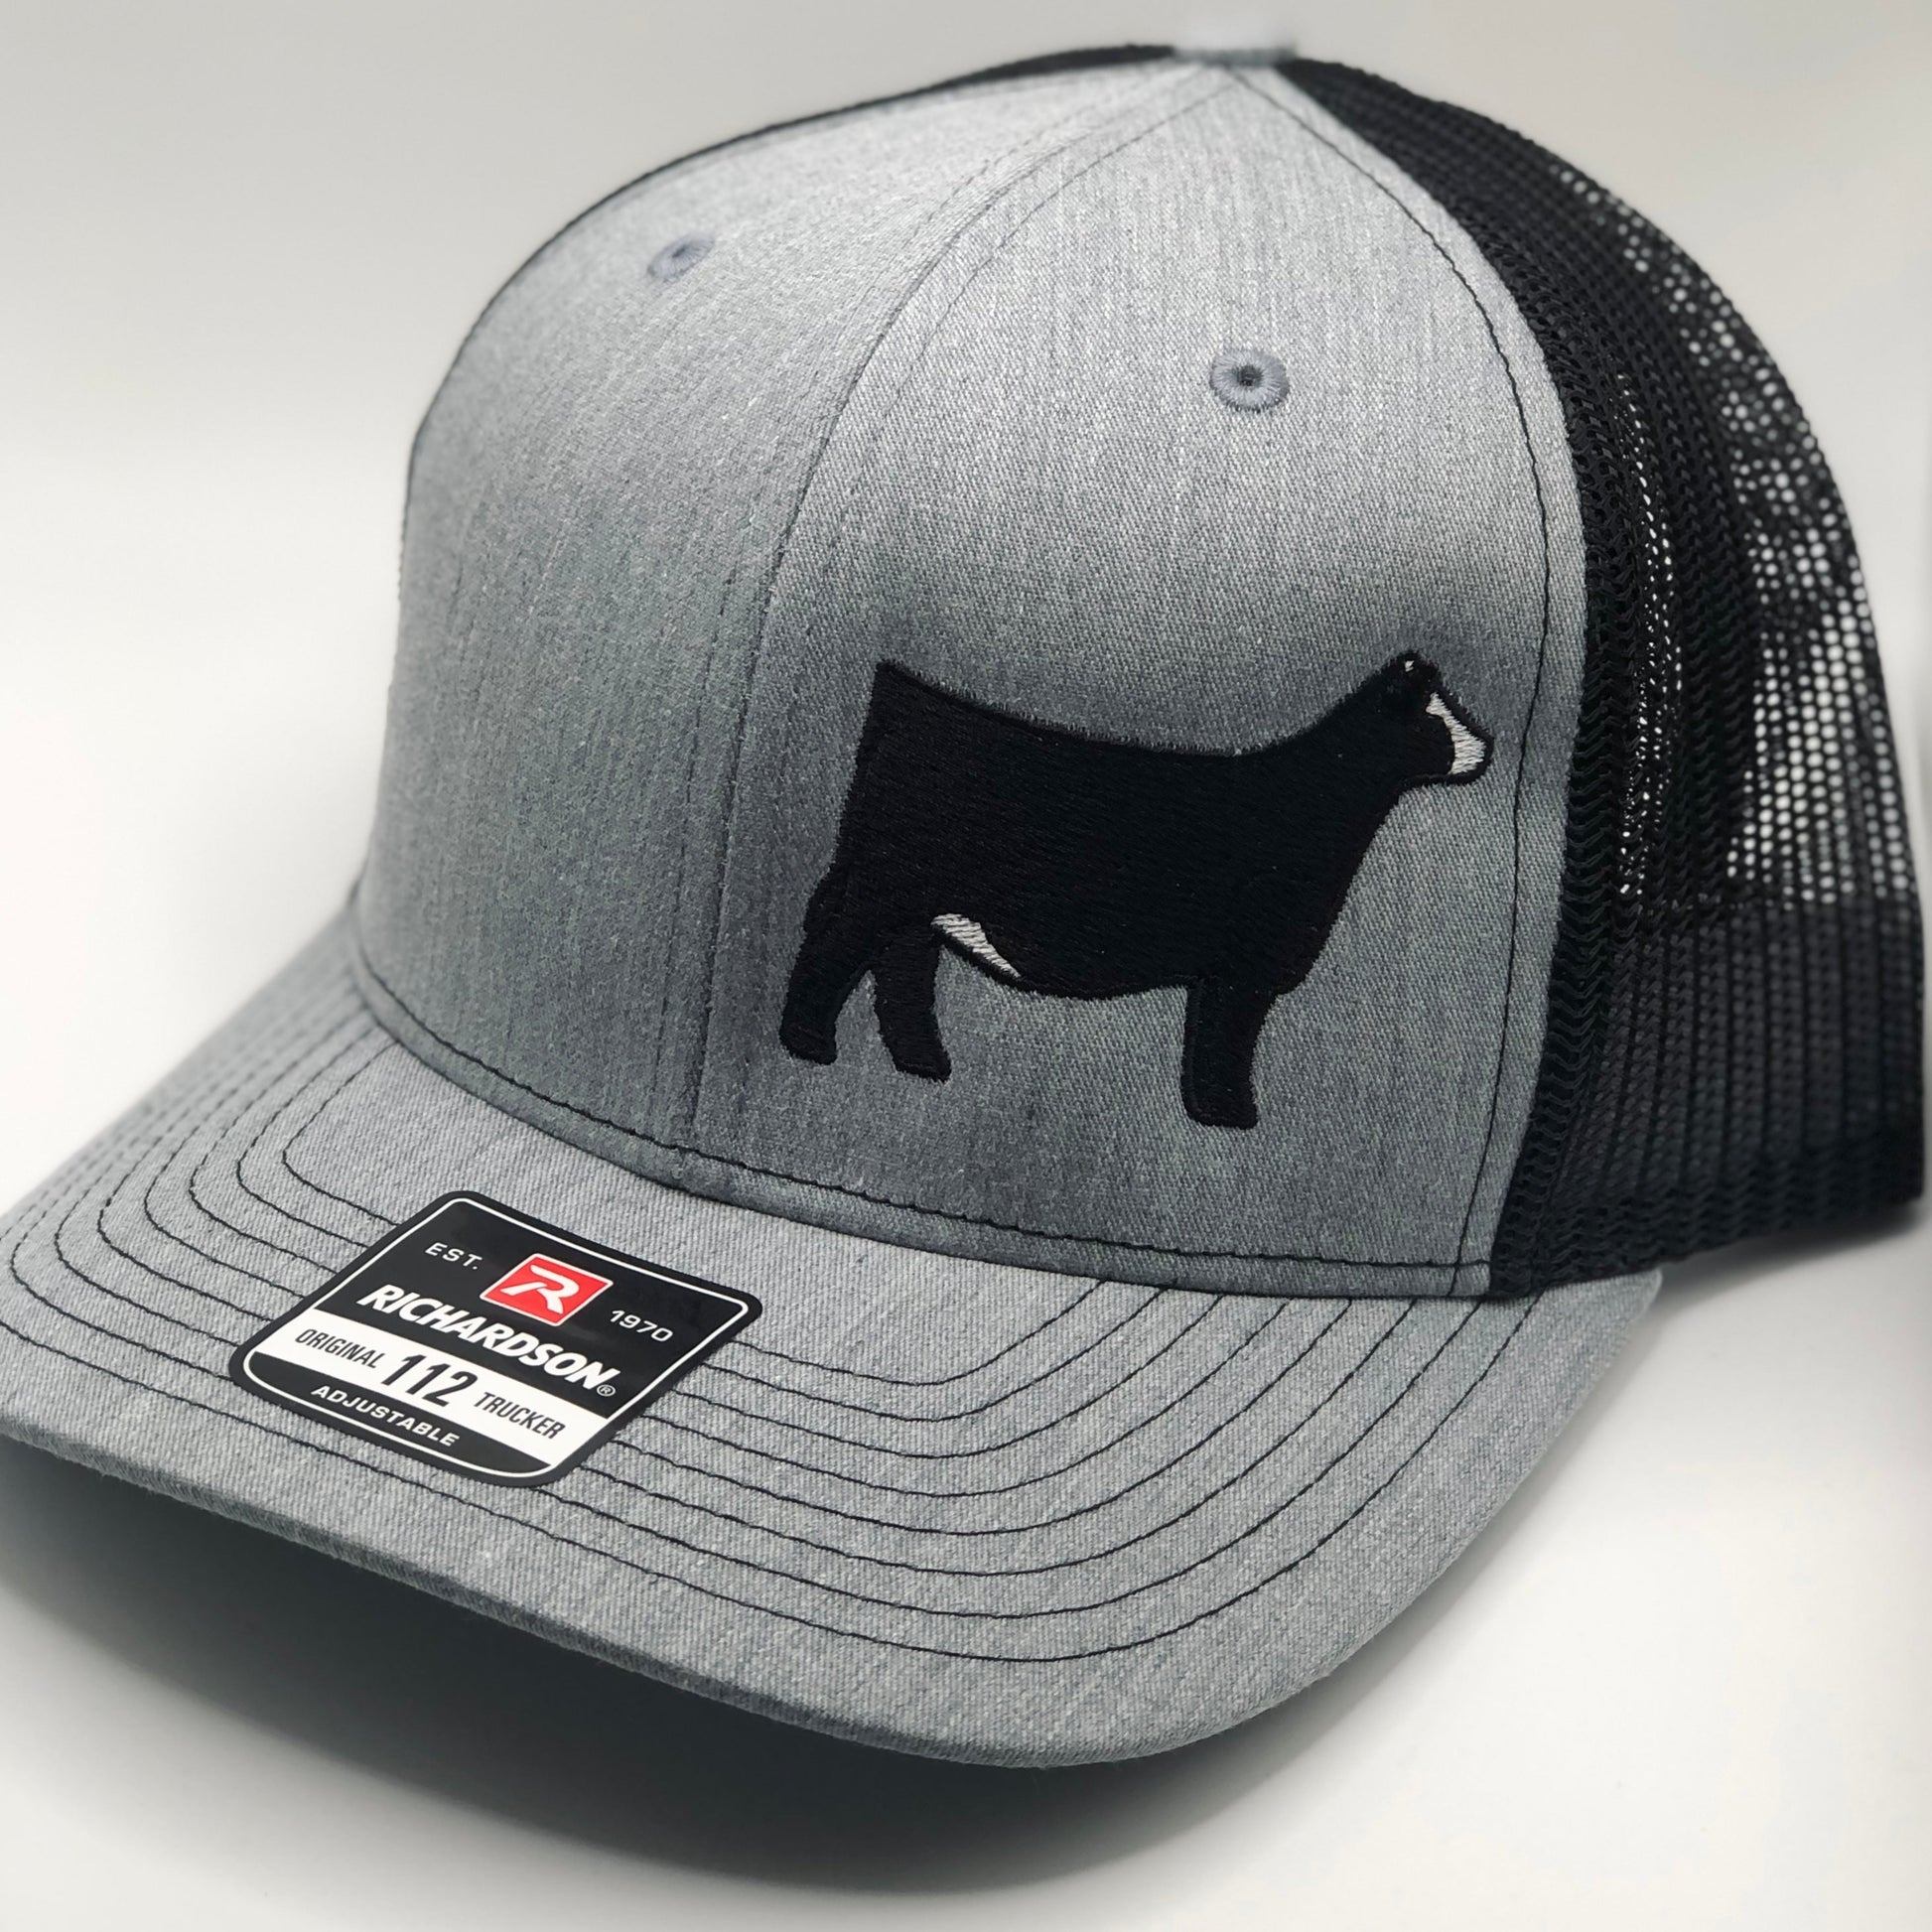 Simmental show cattle embroidered livestock hat